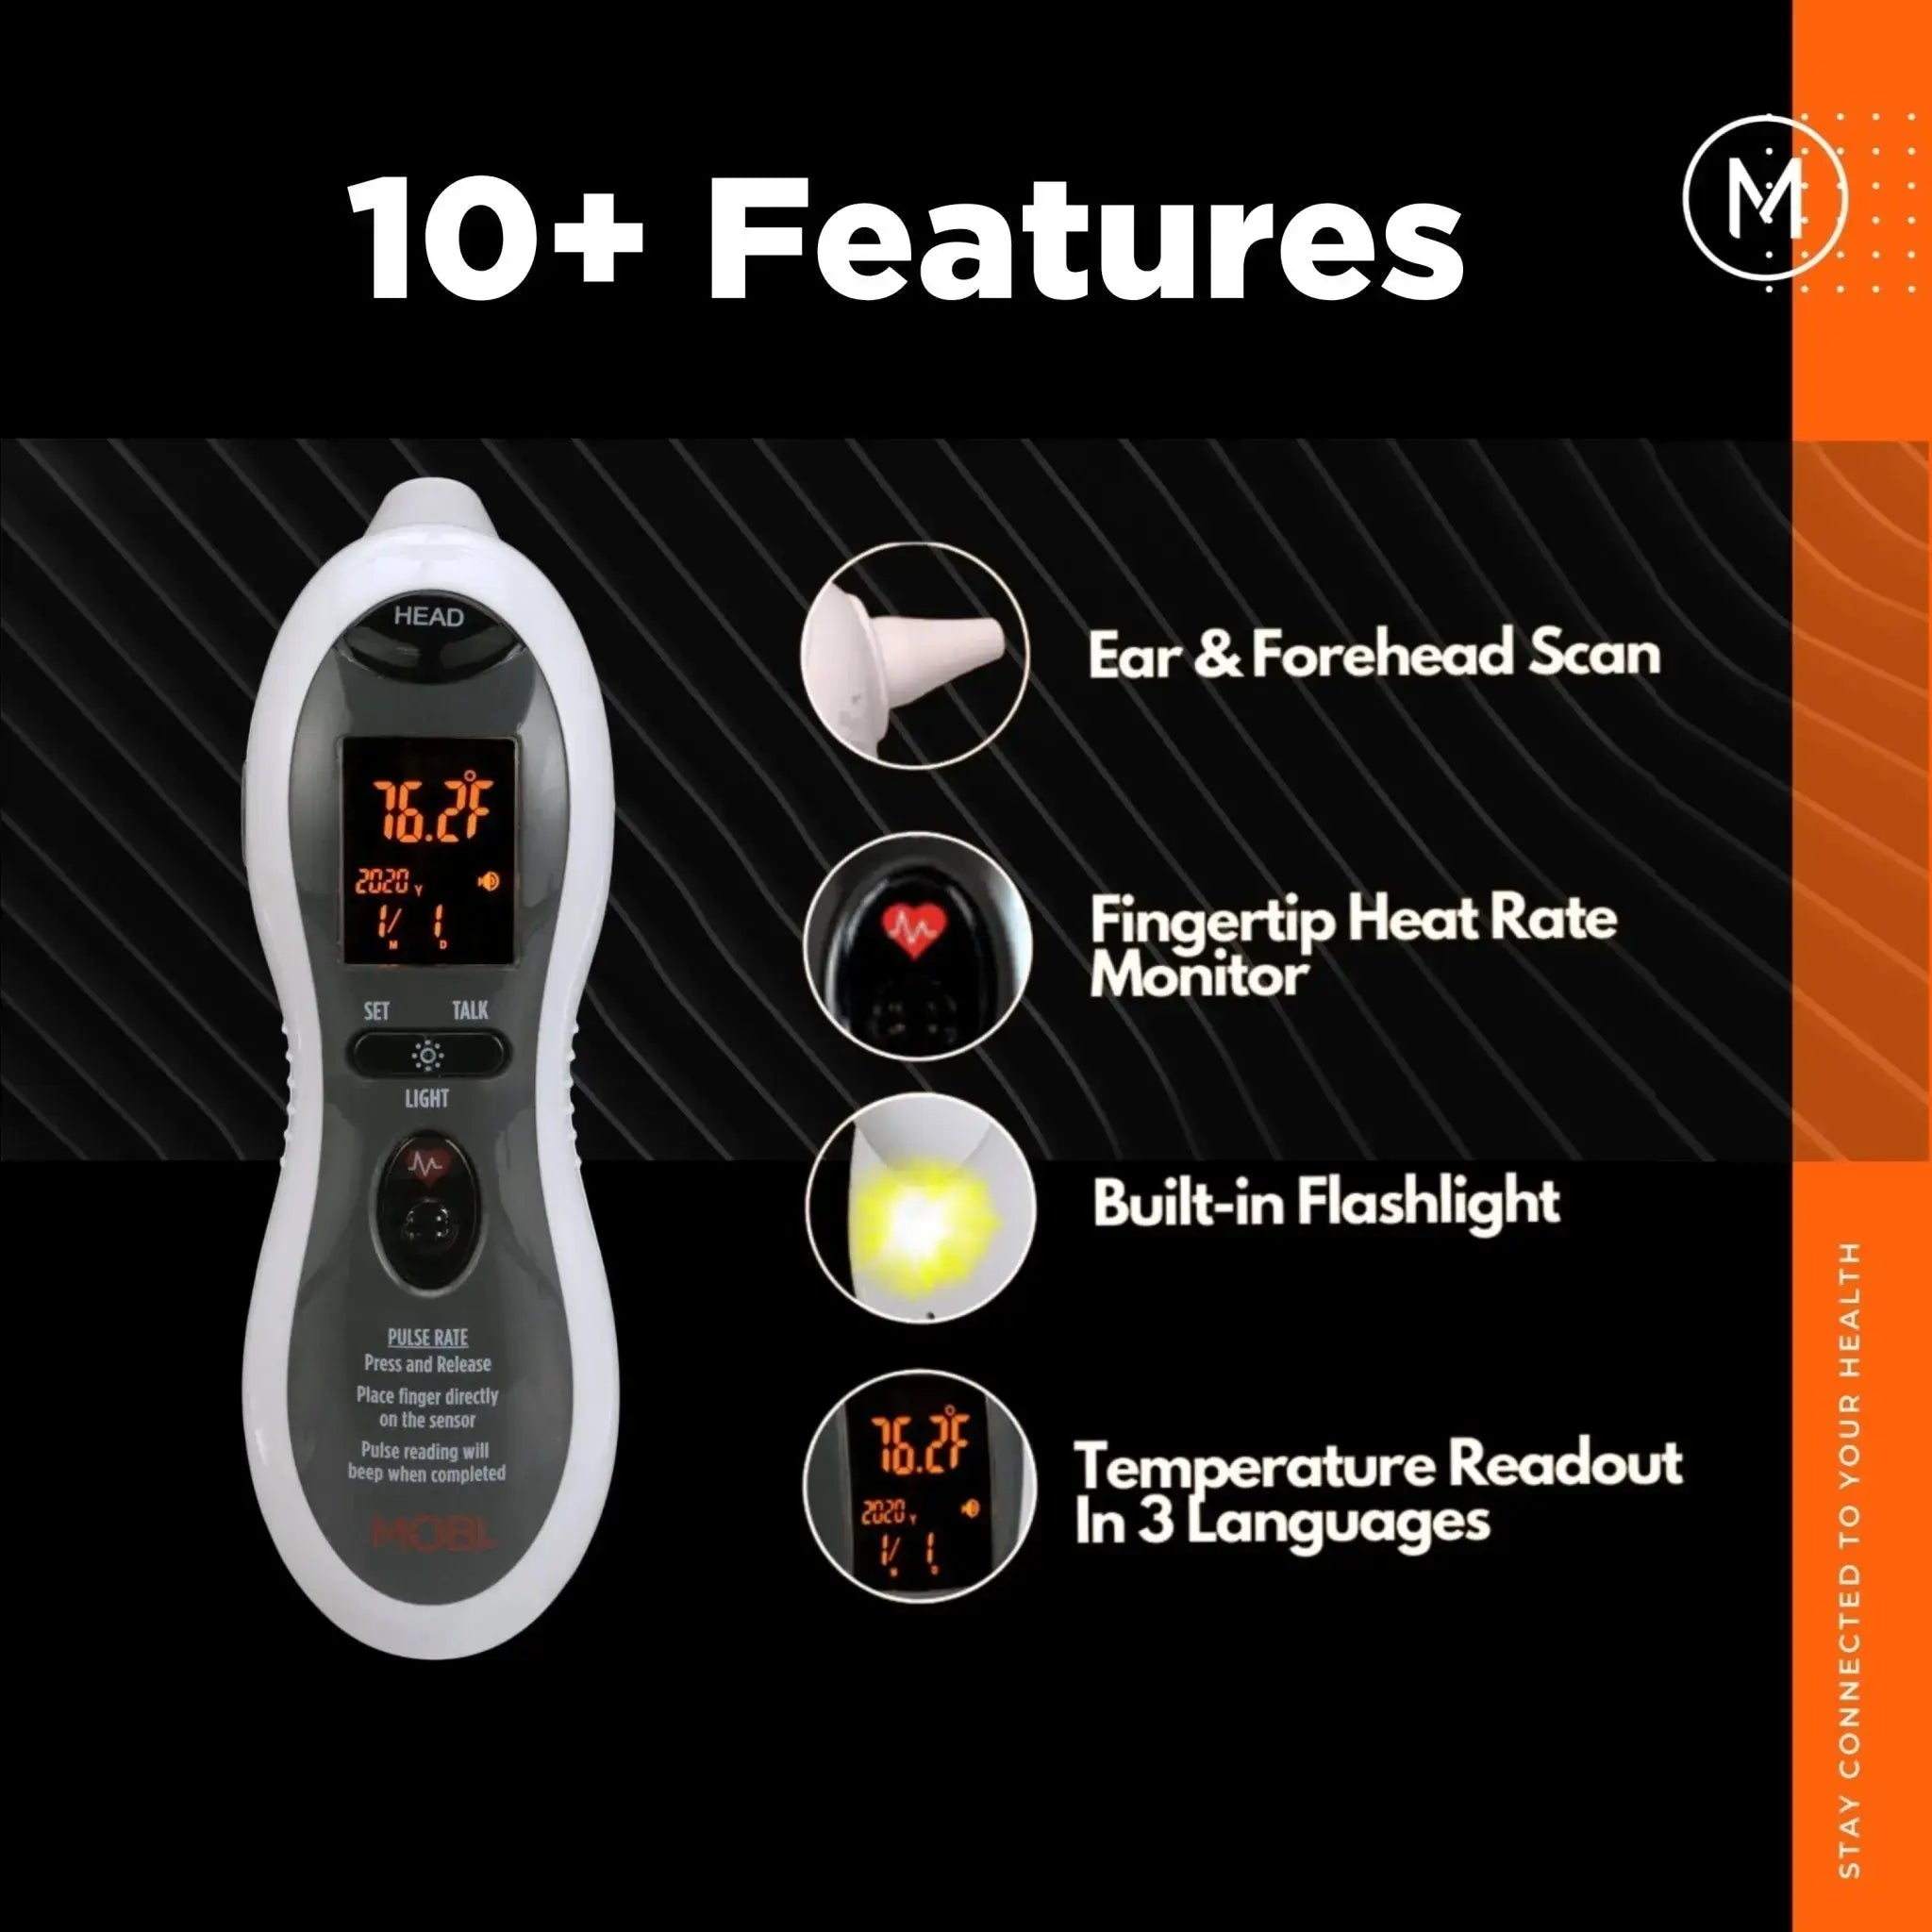 Talking Thermometer - Ideal For Visually Impaired Users 